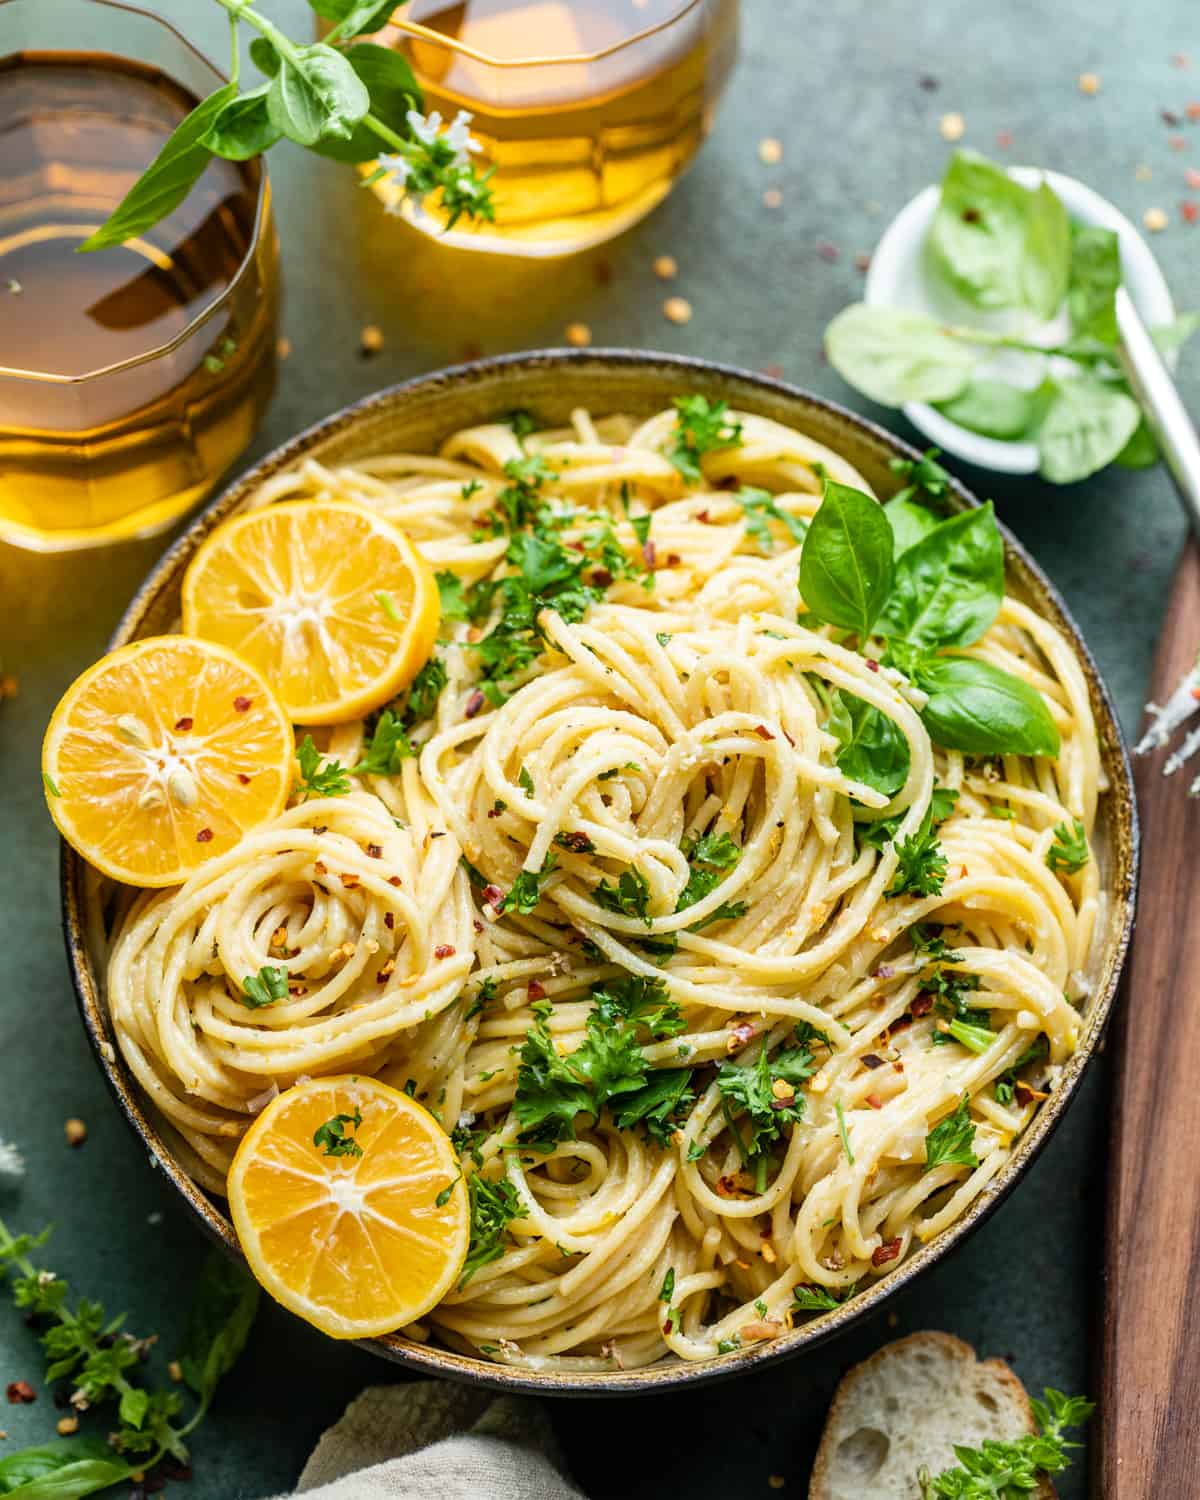 lemon garlic pasta in a bowl with sliced lemons and fresh basil on top.